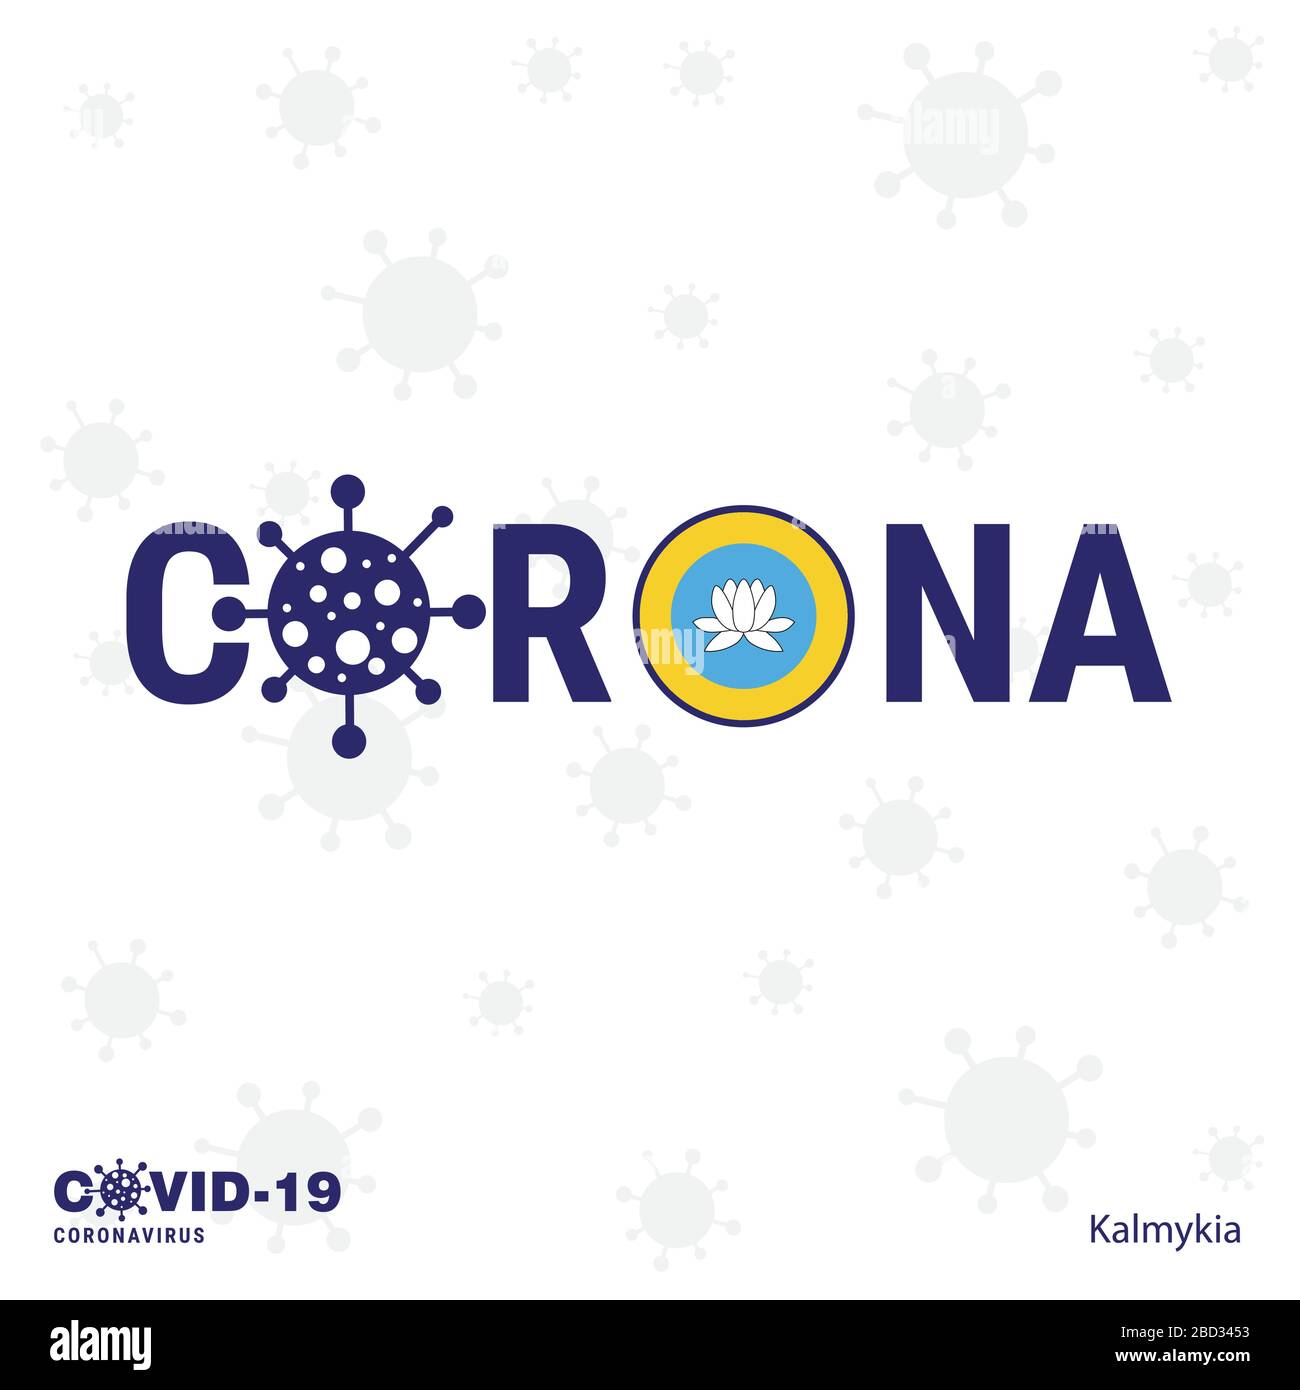 Kalmykia Coronavirus Typography. COVID-19 country banner. Stay home, Stay Healthy. Take care of your own health Stock Vector